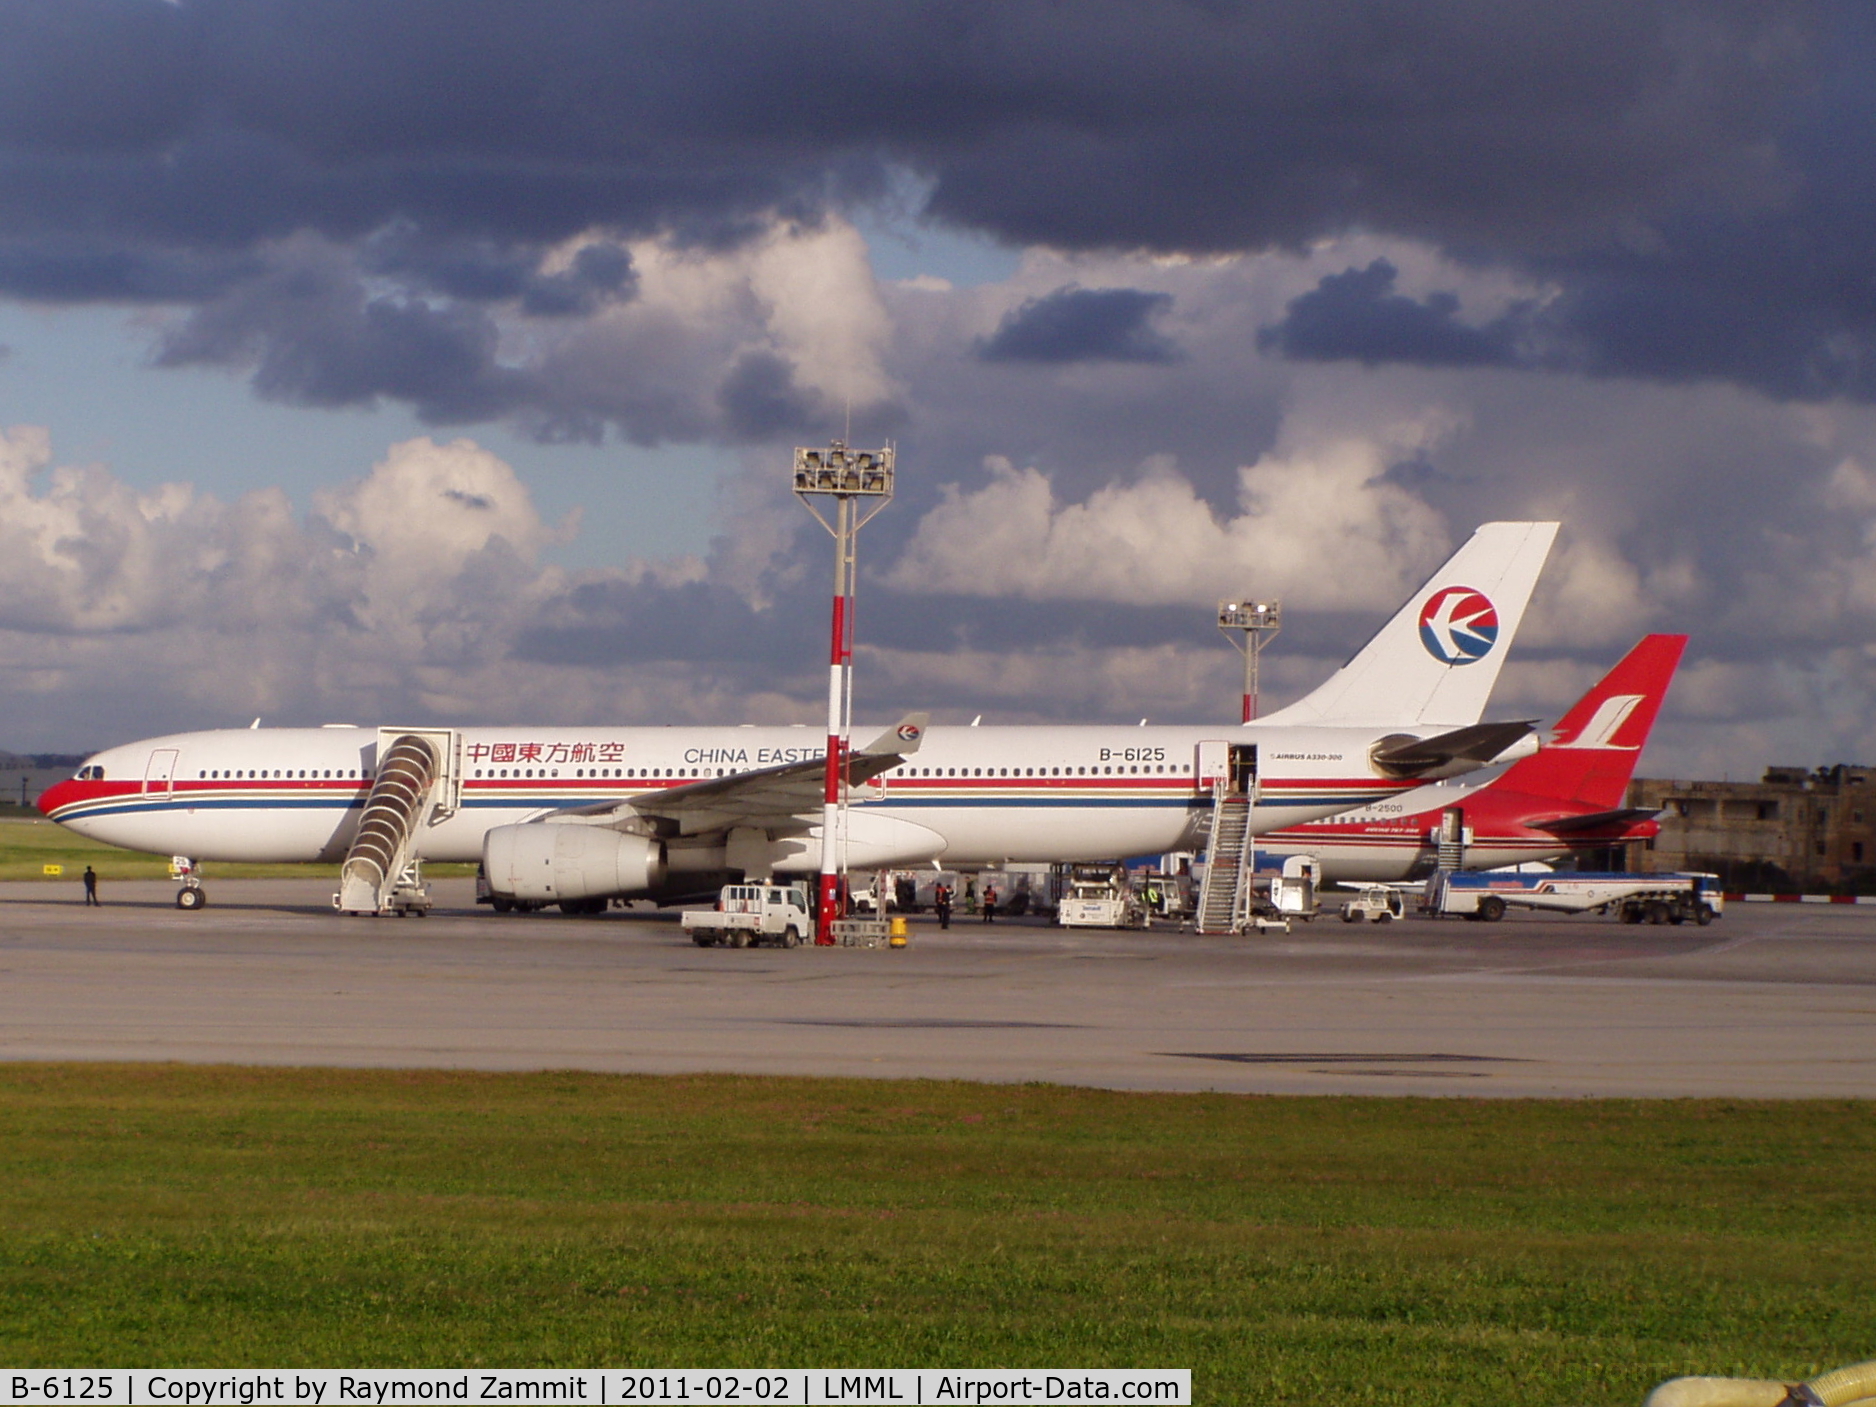 B-6125, 2006 Airbus A330-343X C/N 773, A330 B-6125 China Eastern Airlines